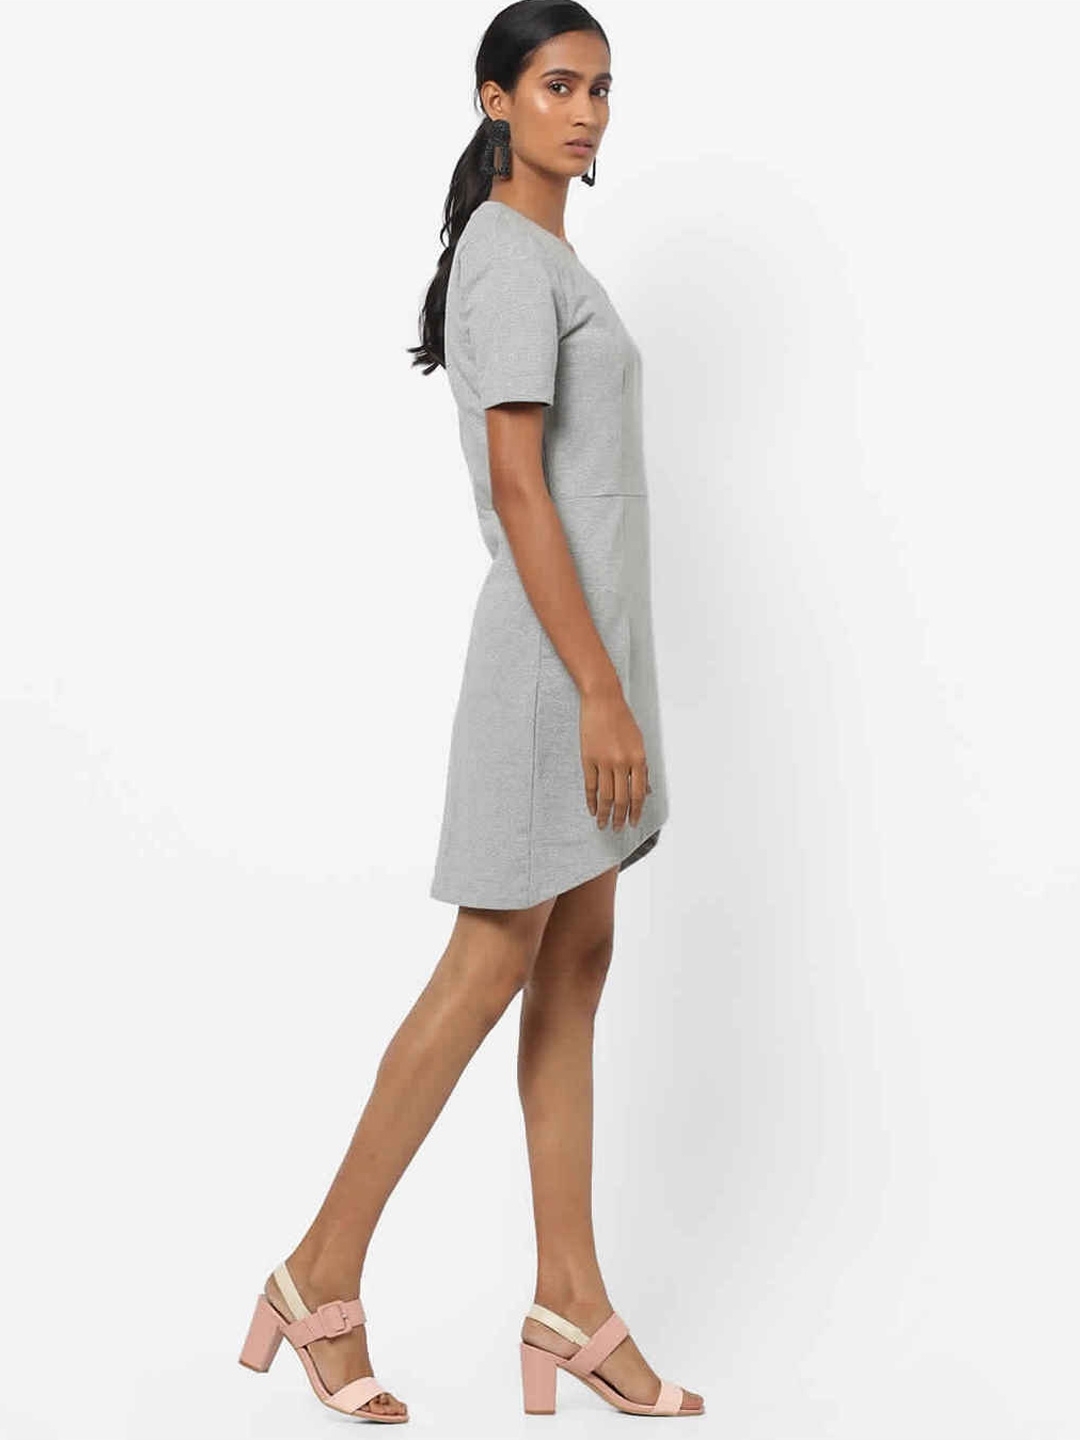 Lellys Heathered Sheath Dress with Overlapping Front